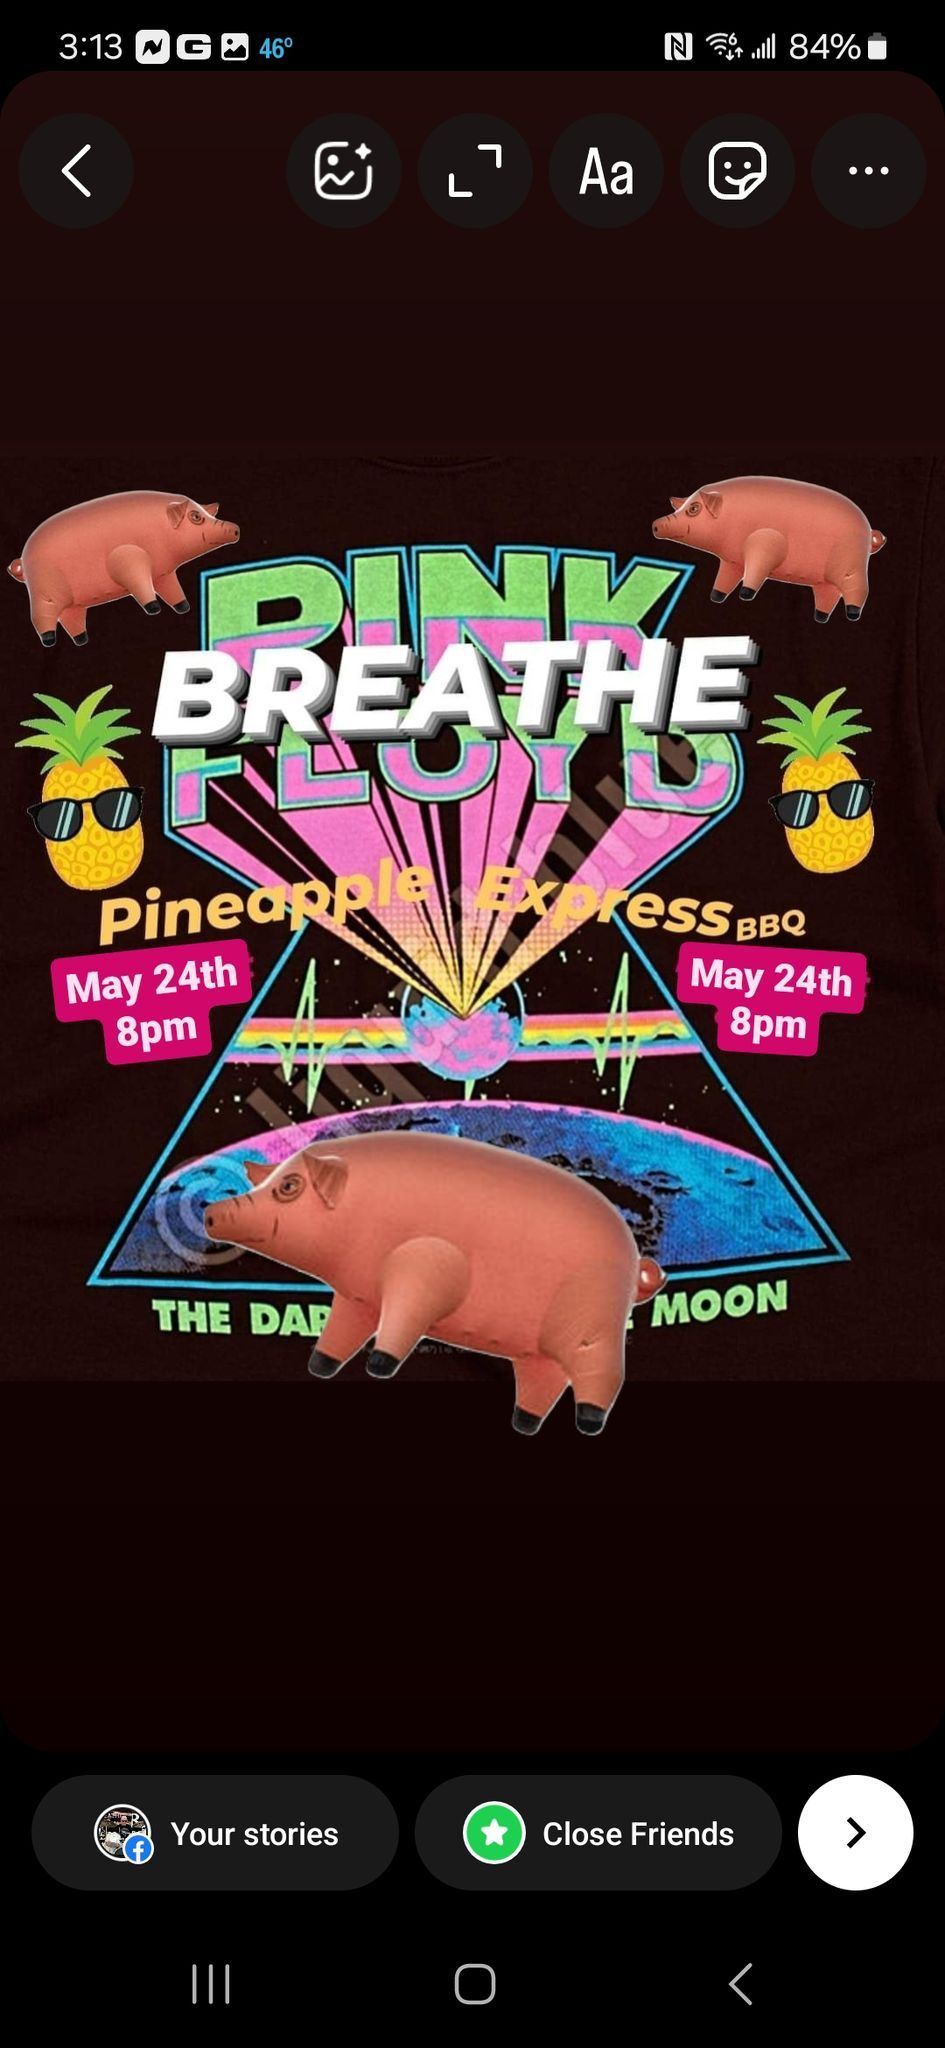 ((BREATHE)) Returns to Pineapple Express BBQ May 24th 8pm "Outside Stage & Bear Garden"